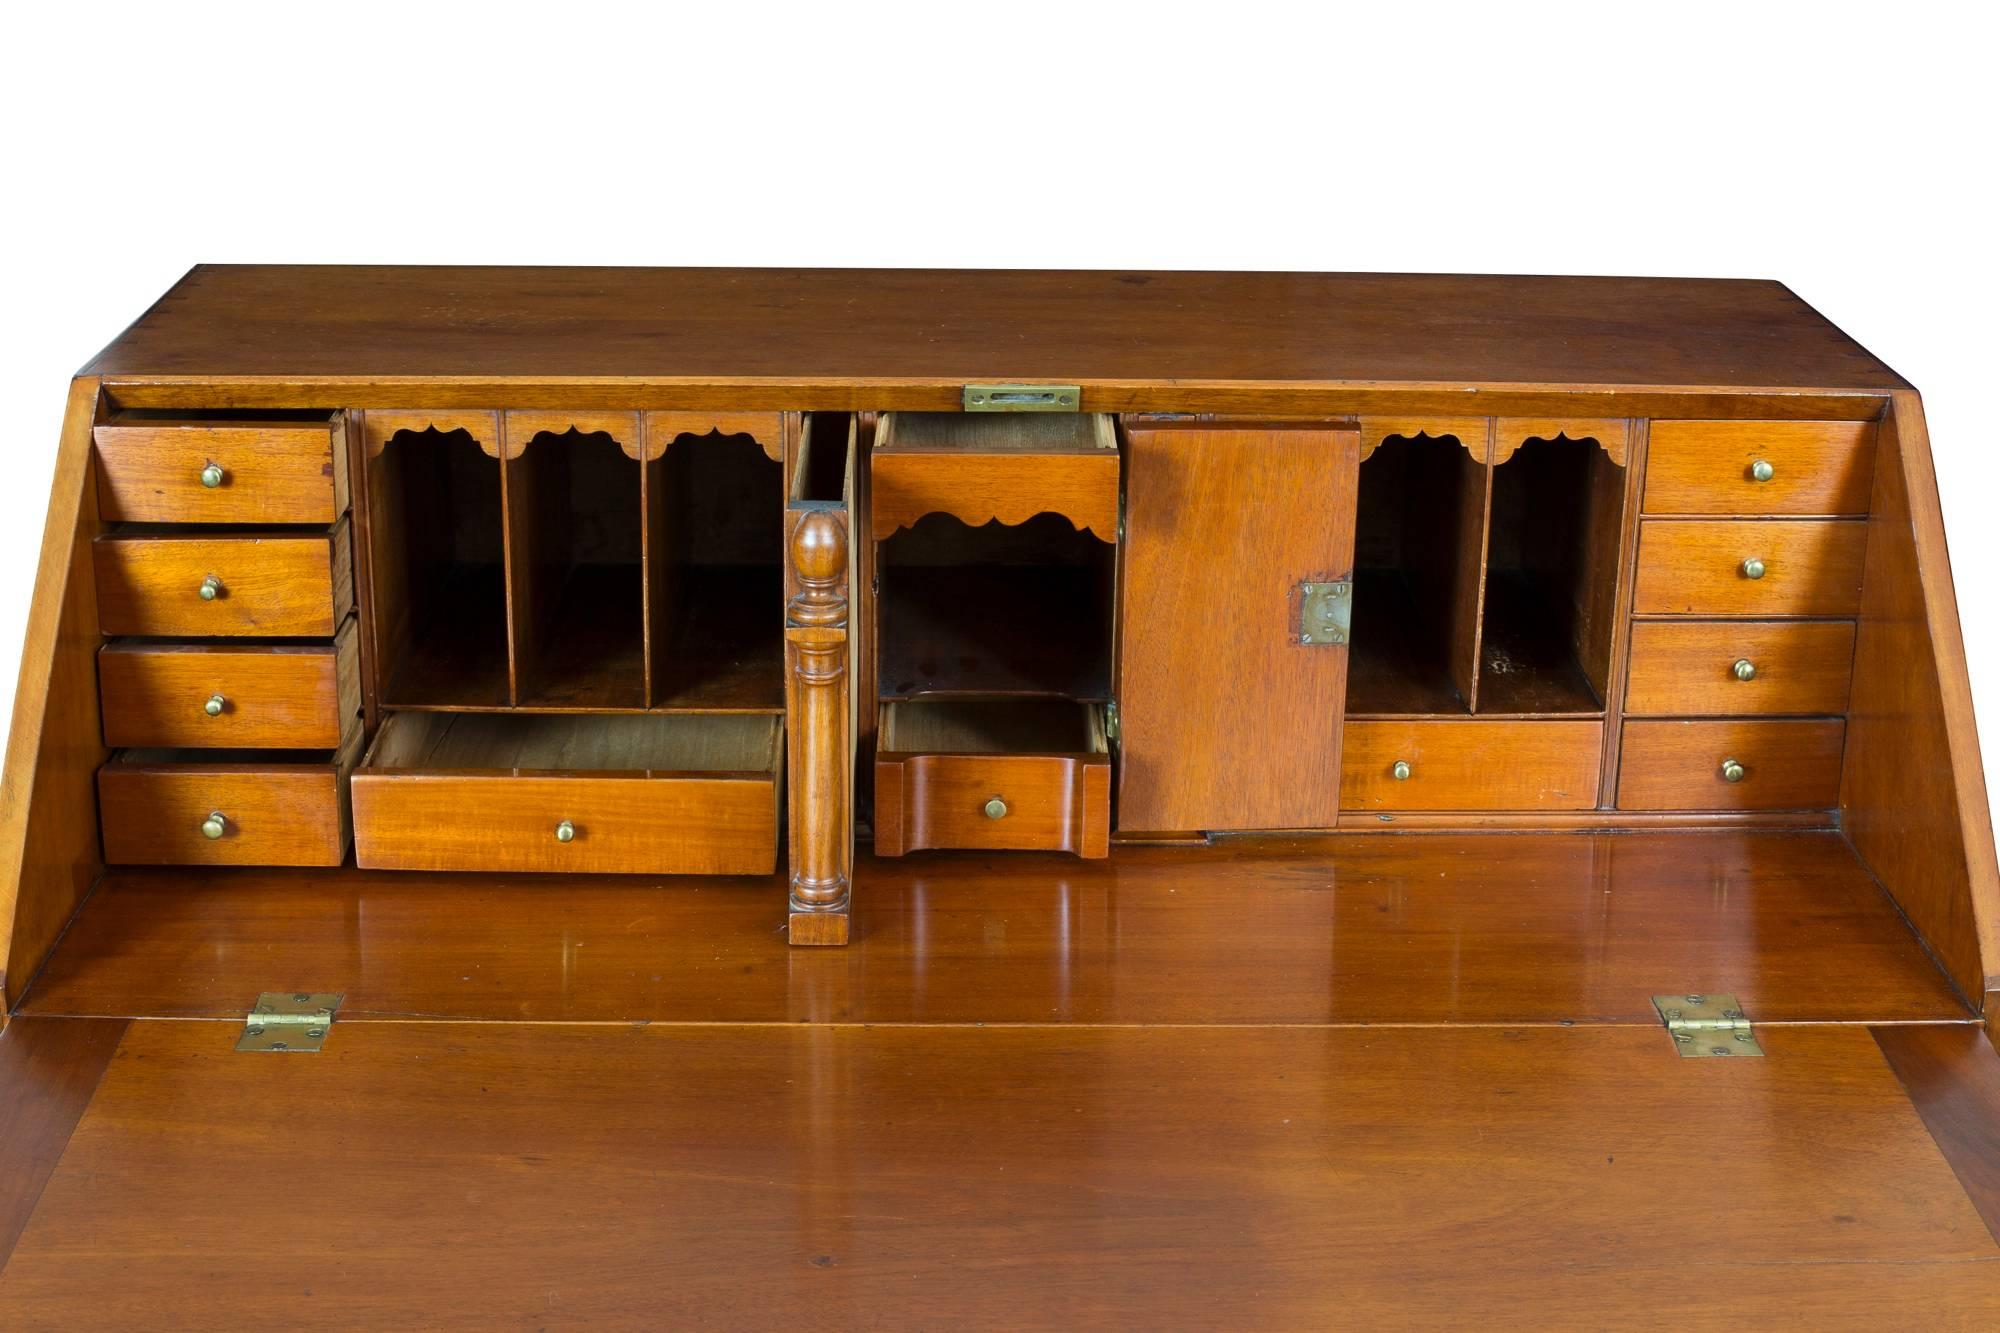 This is an estimable serpentine desk with blocked ends on magnificent gadrooned feet. Interestingly, the mahogany is blond and it gives warm amber tones of great depth. Unlike many of these serpentine desks, which have very plain interiors, this